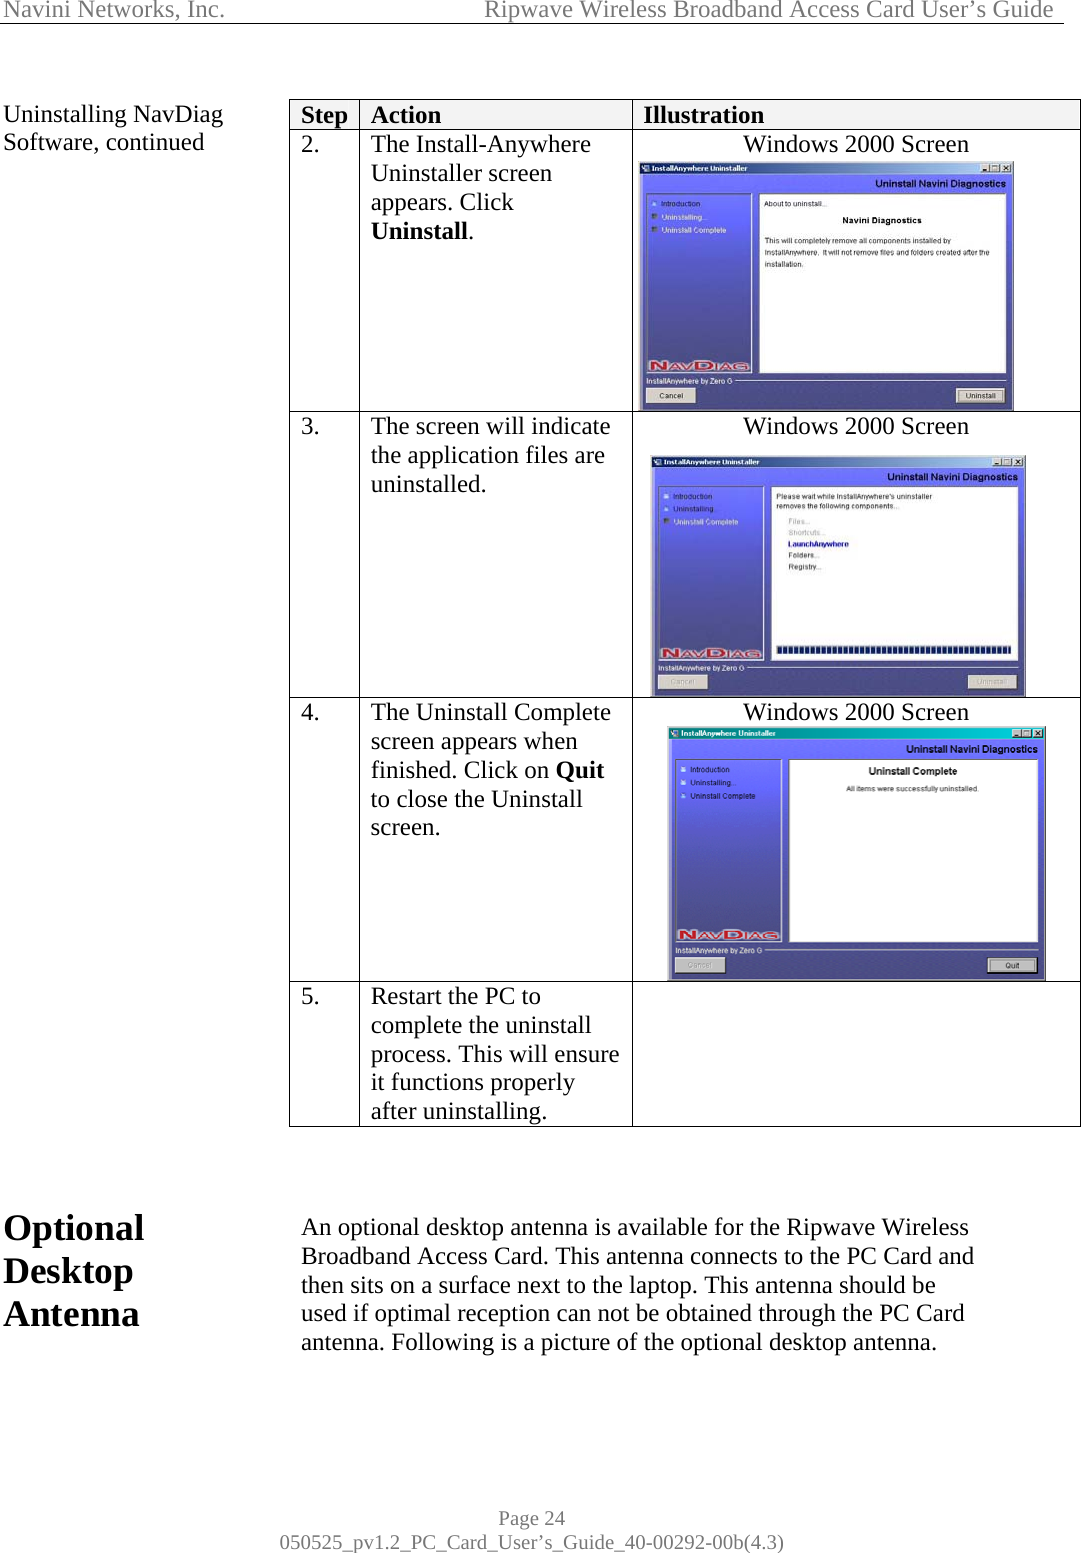 Navini Networks, Inc.            Ripwave Wireless Broadband Access Card User’s Guide Page 24 050525_pv1.2_PC_Card_User’s_Guide_40-00292-00b(4.3) Uninstalling NavDiag Software, continued                                     Optional Desktop Antenna    Step  Action  Illustration 2. The Install-Anywhere Uninstaller screen appears. Click Uninstall. Windows 2000 Screen  3.  The screen will indicate the application files are uninstalled. Windows 2000 Screen  4.  The Uninstall Complete screen appears when finished. Click on Quit to close the Uninstall screen. Windows 2000 Screen  5.  Restart the PC to complete the uninstall process. This will ensure it functions properly after uninstalling.     An optional desktop antenna is available for the Ripwave Wireless Broadband Access Card. This antenna connects to the PC Card and then sits on a surface next to the laptop. This antenna should be used if optimal reception can not be obtained through the PC Card antenna. Following is a picture of the optional desktop antenna.   